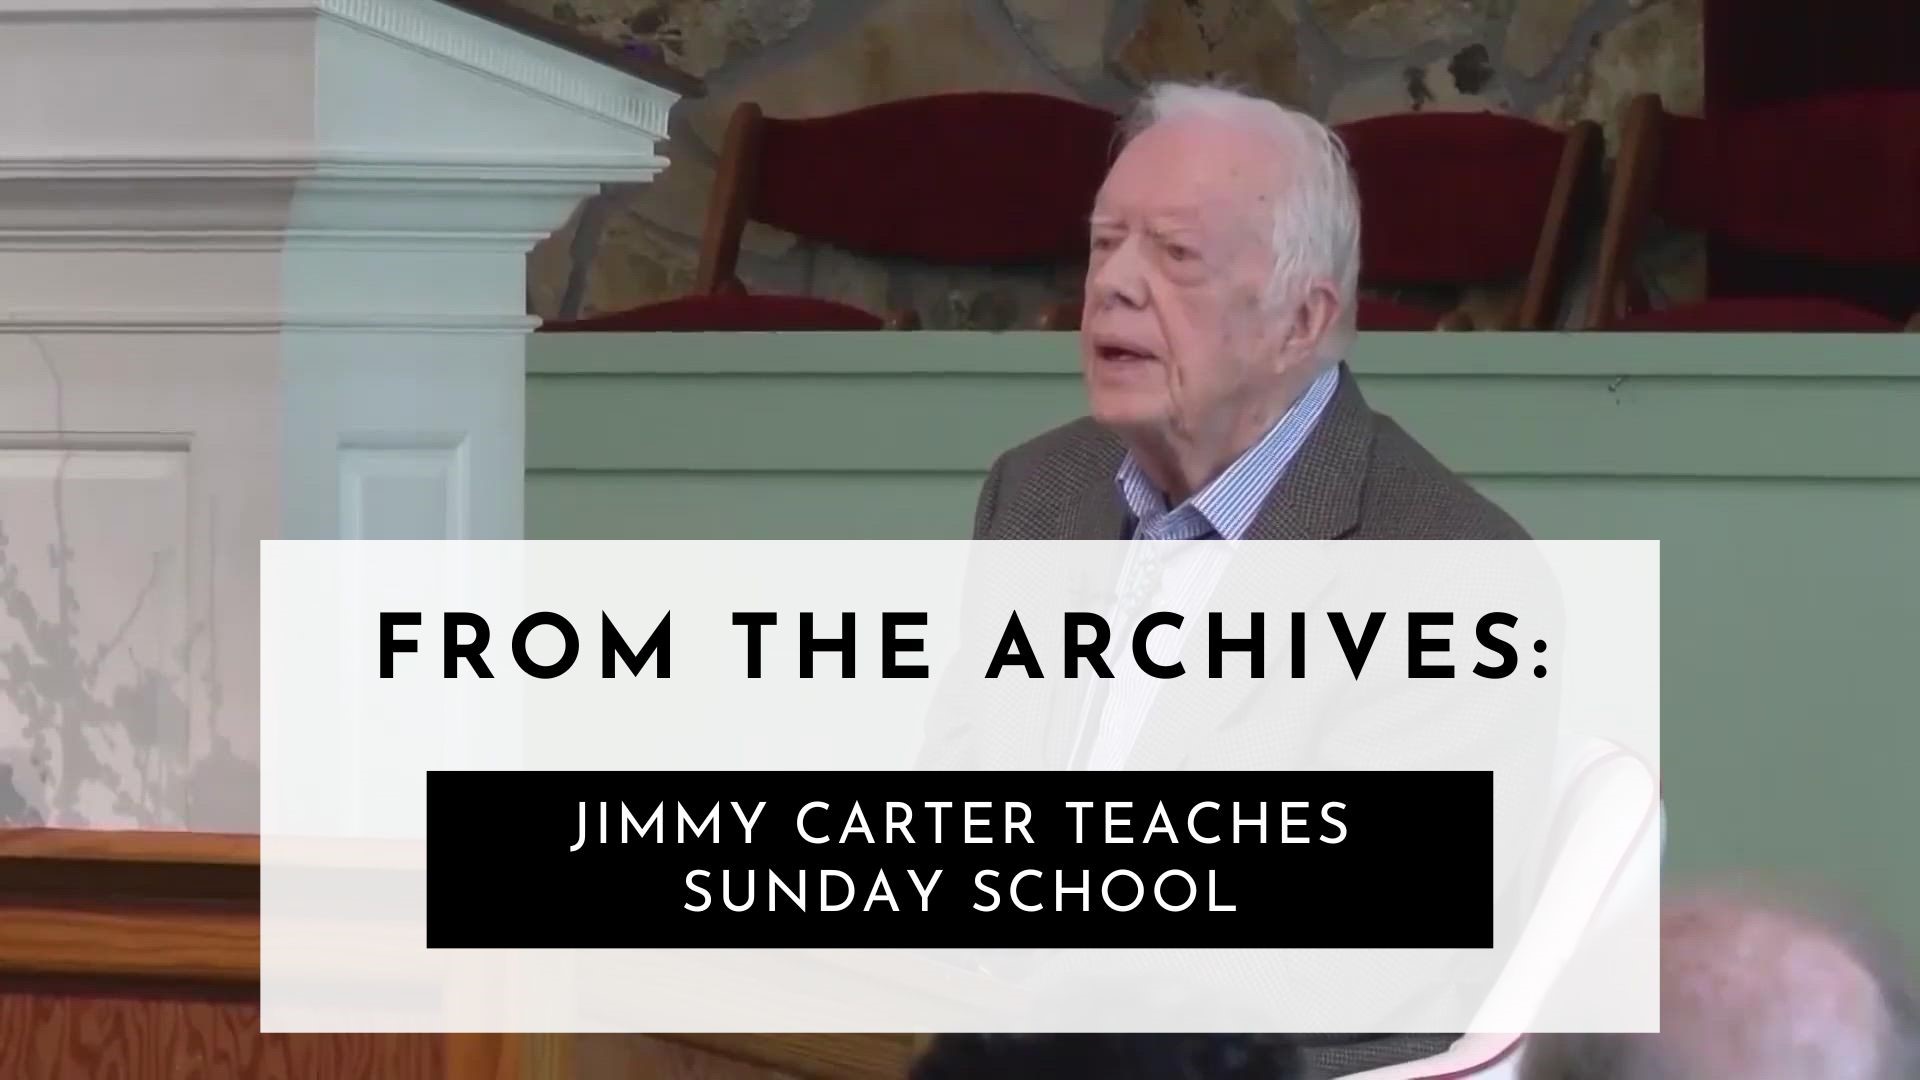 In 2019 at his church in Plains, Georgia, Jimmy Carter taught a Sunday school lesson. This is video of his full lesson to the kids.